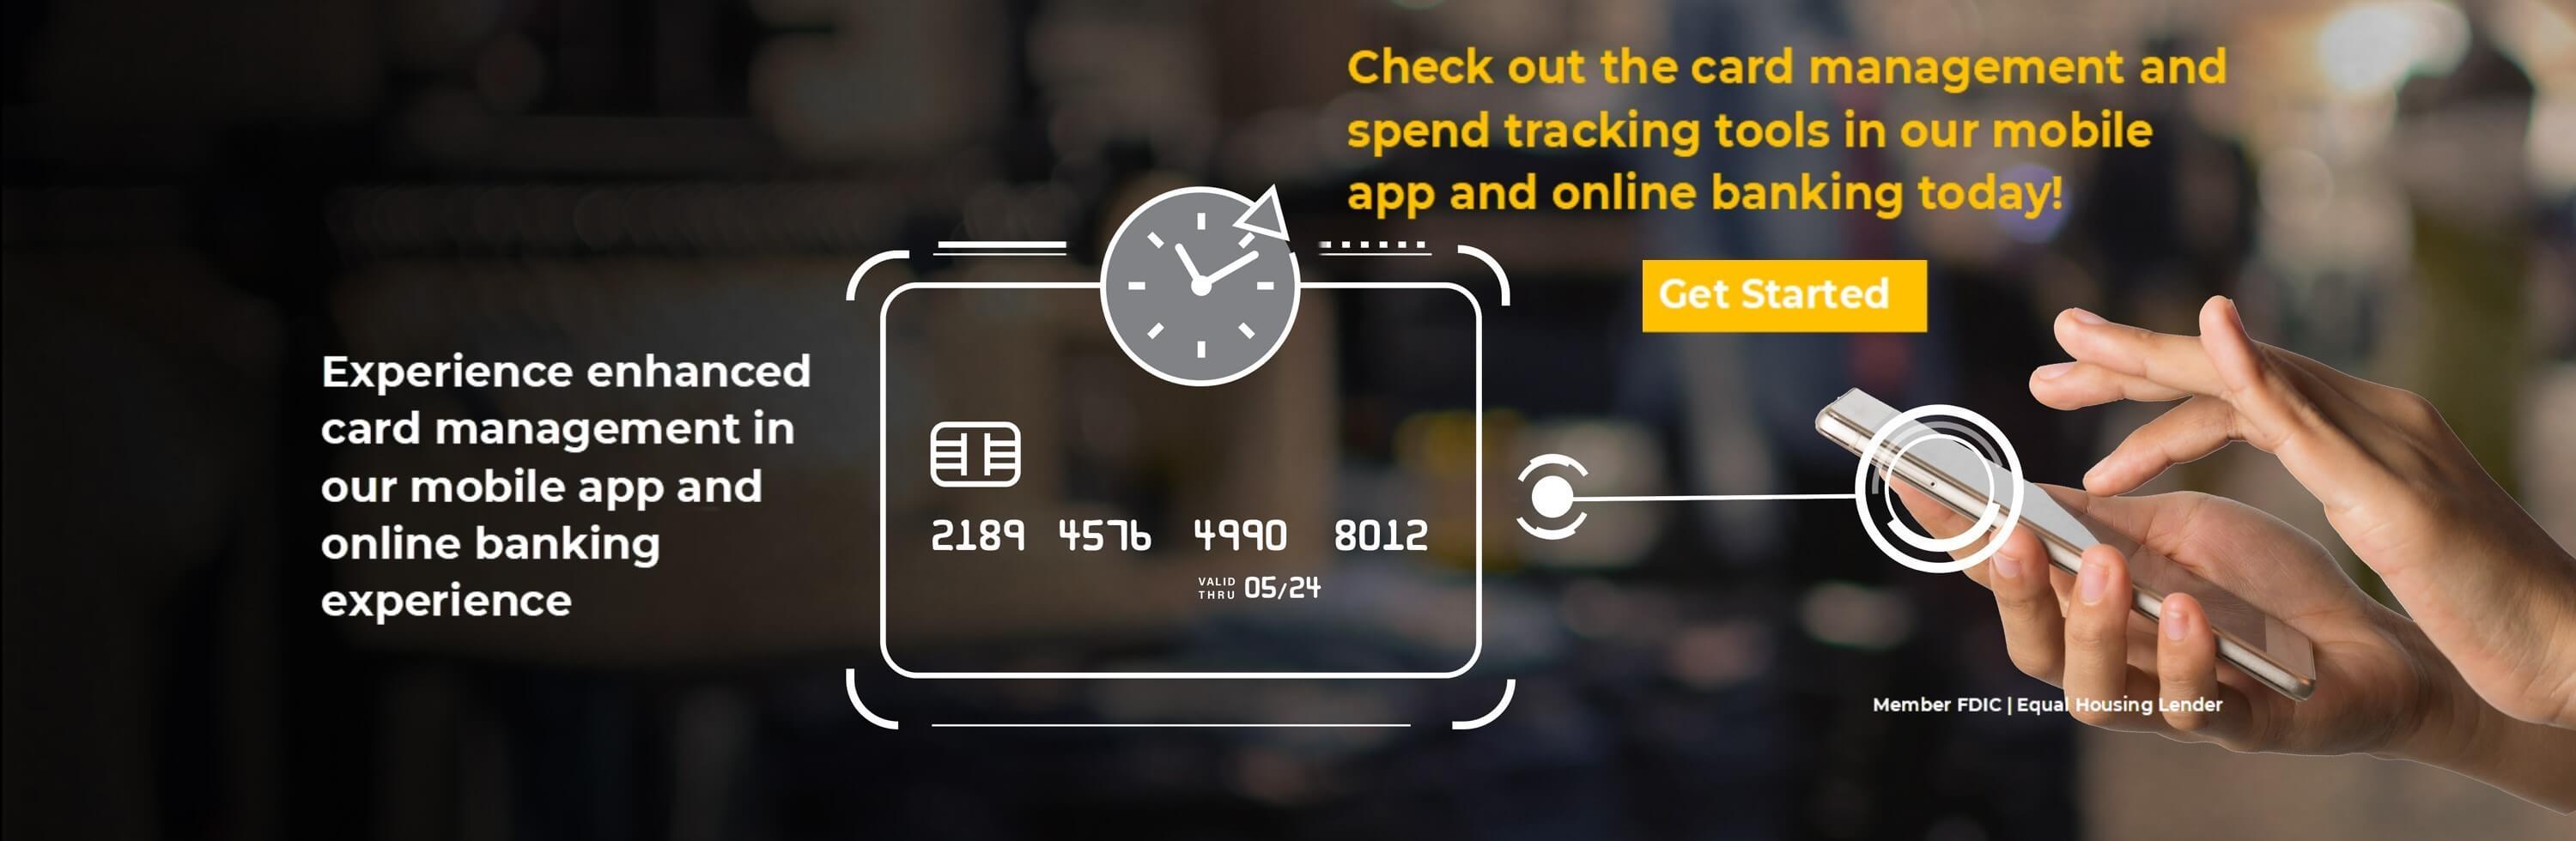 Experience enhanced card management in our mobile app and online banking experience. Check out the card management and spend tracking tools in our mobile app and online banking today! Get Started. app